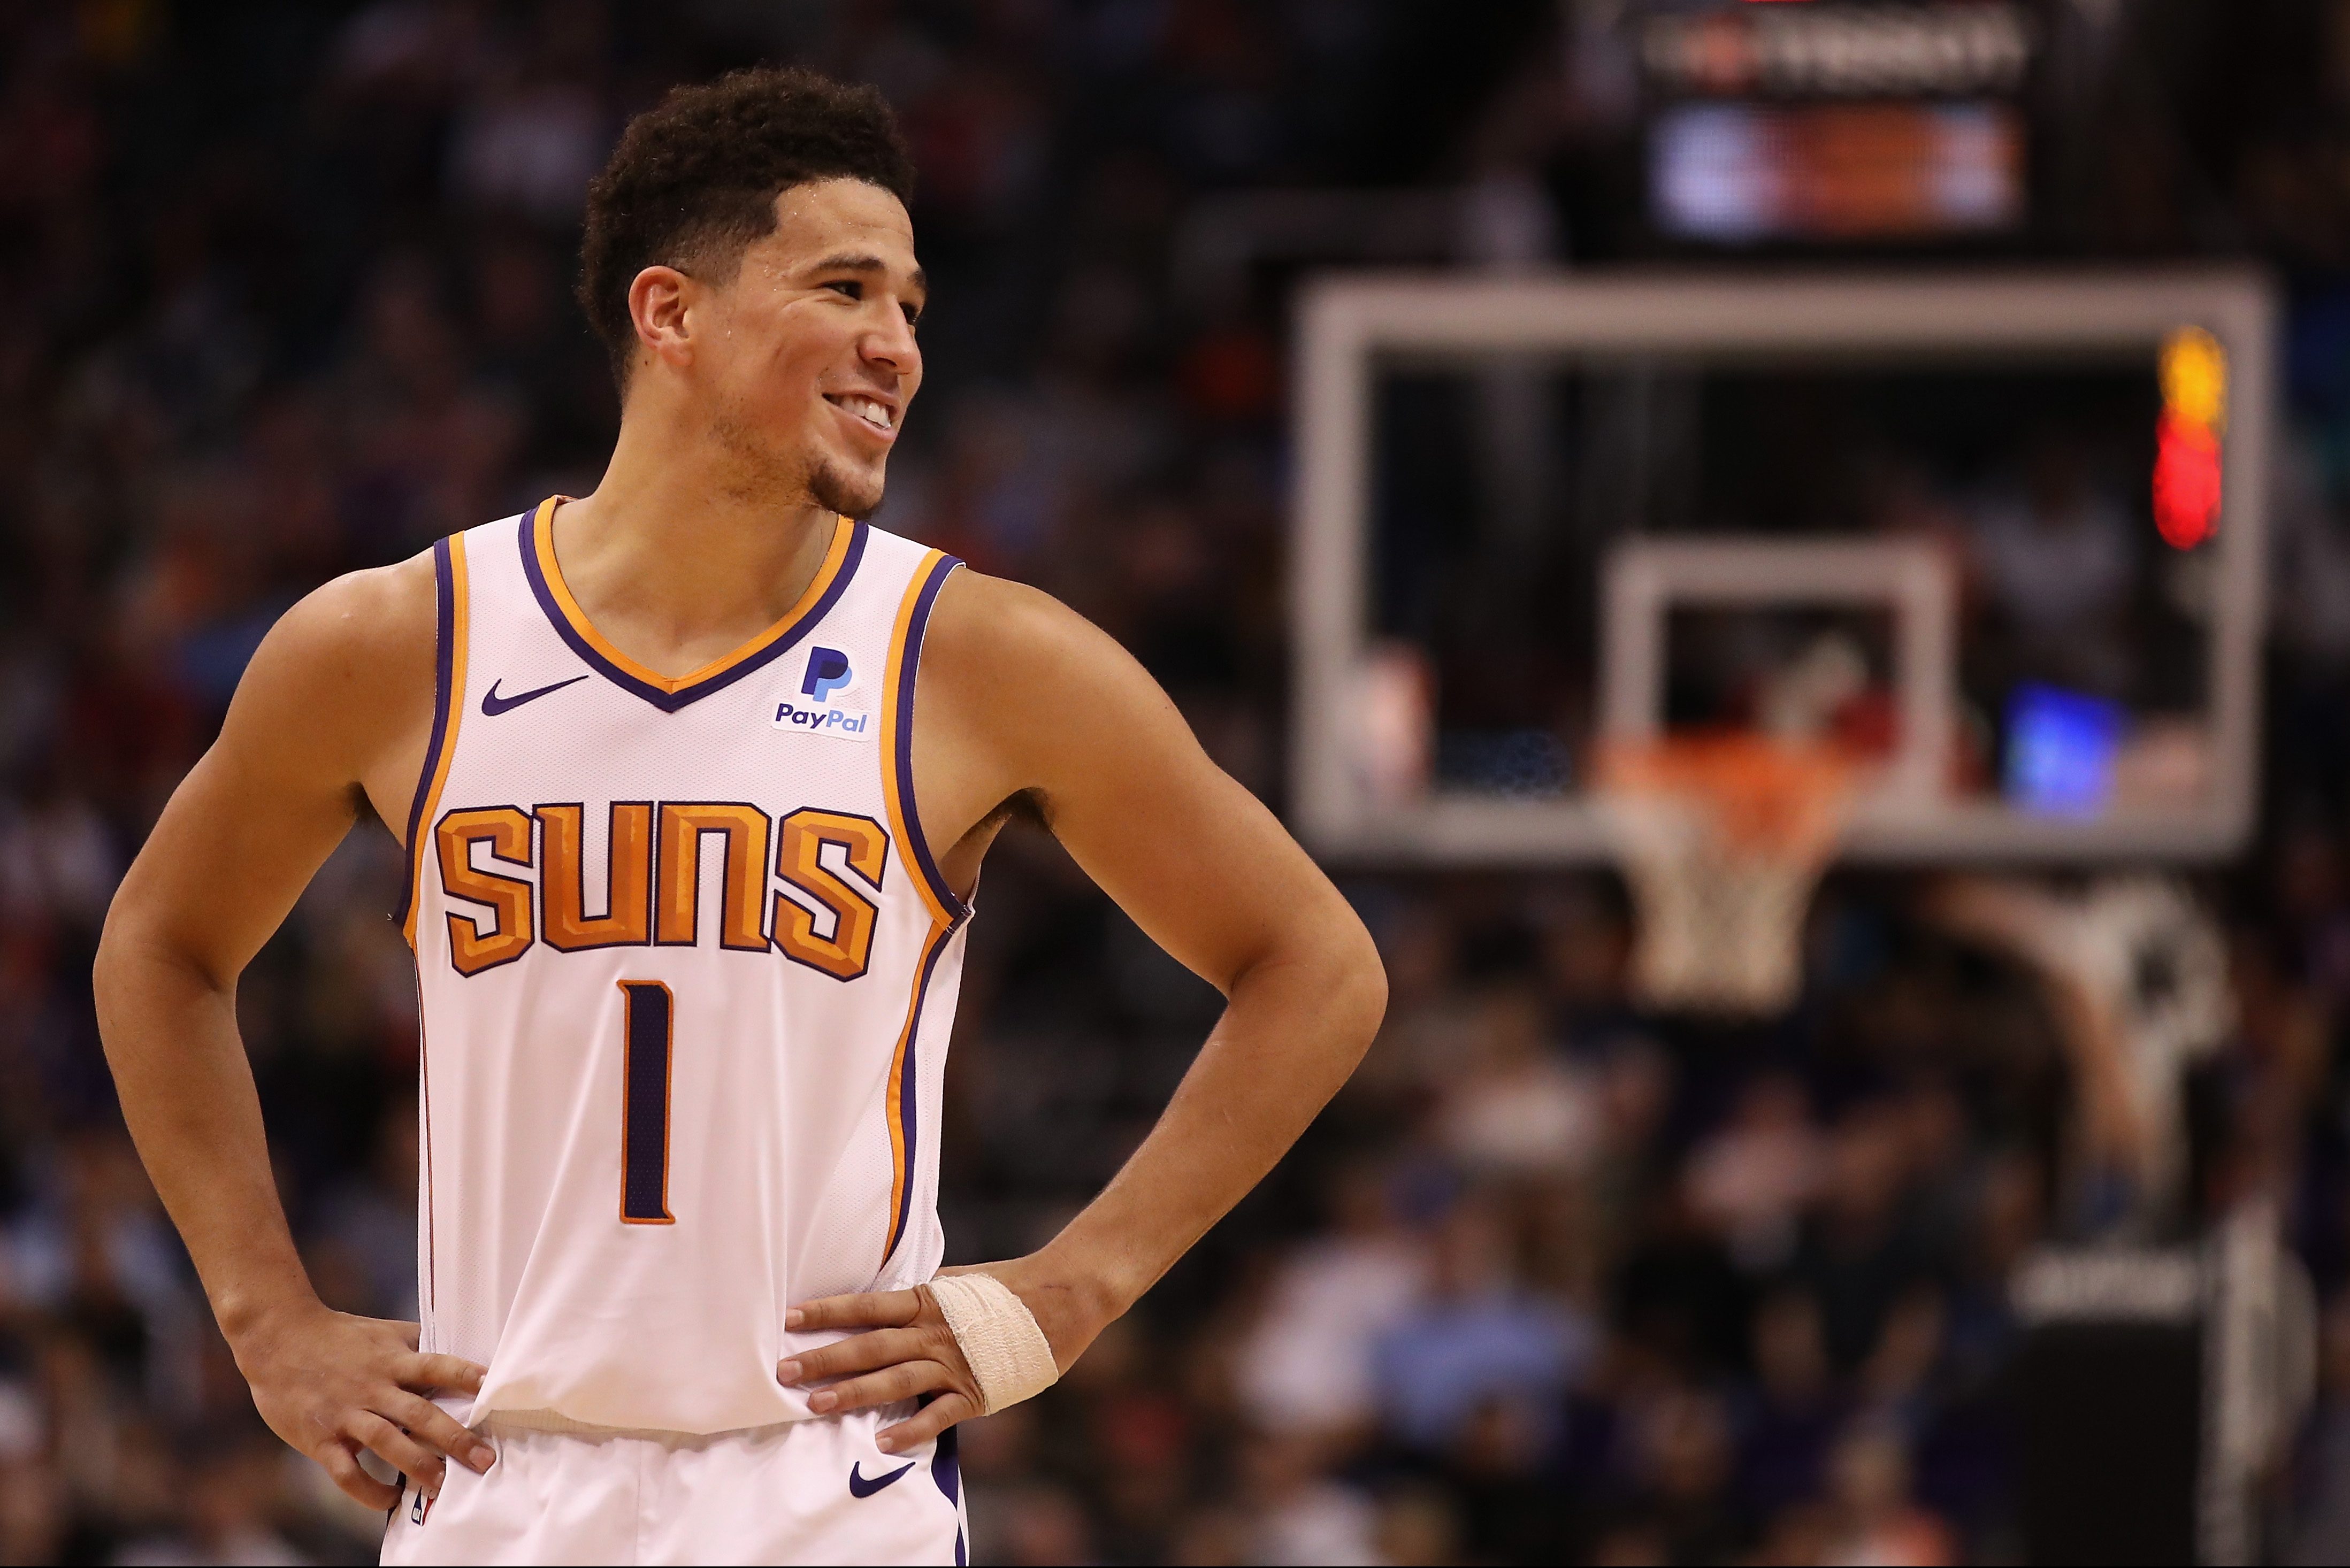 Timberwolves—Suns Trade for Devin Booker Could Be Realistic Says Analyst Heavy